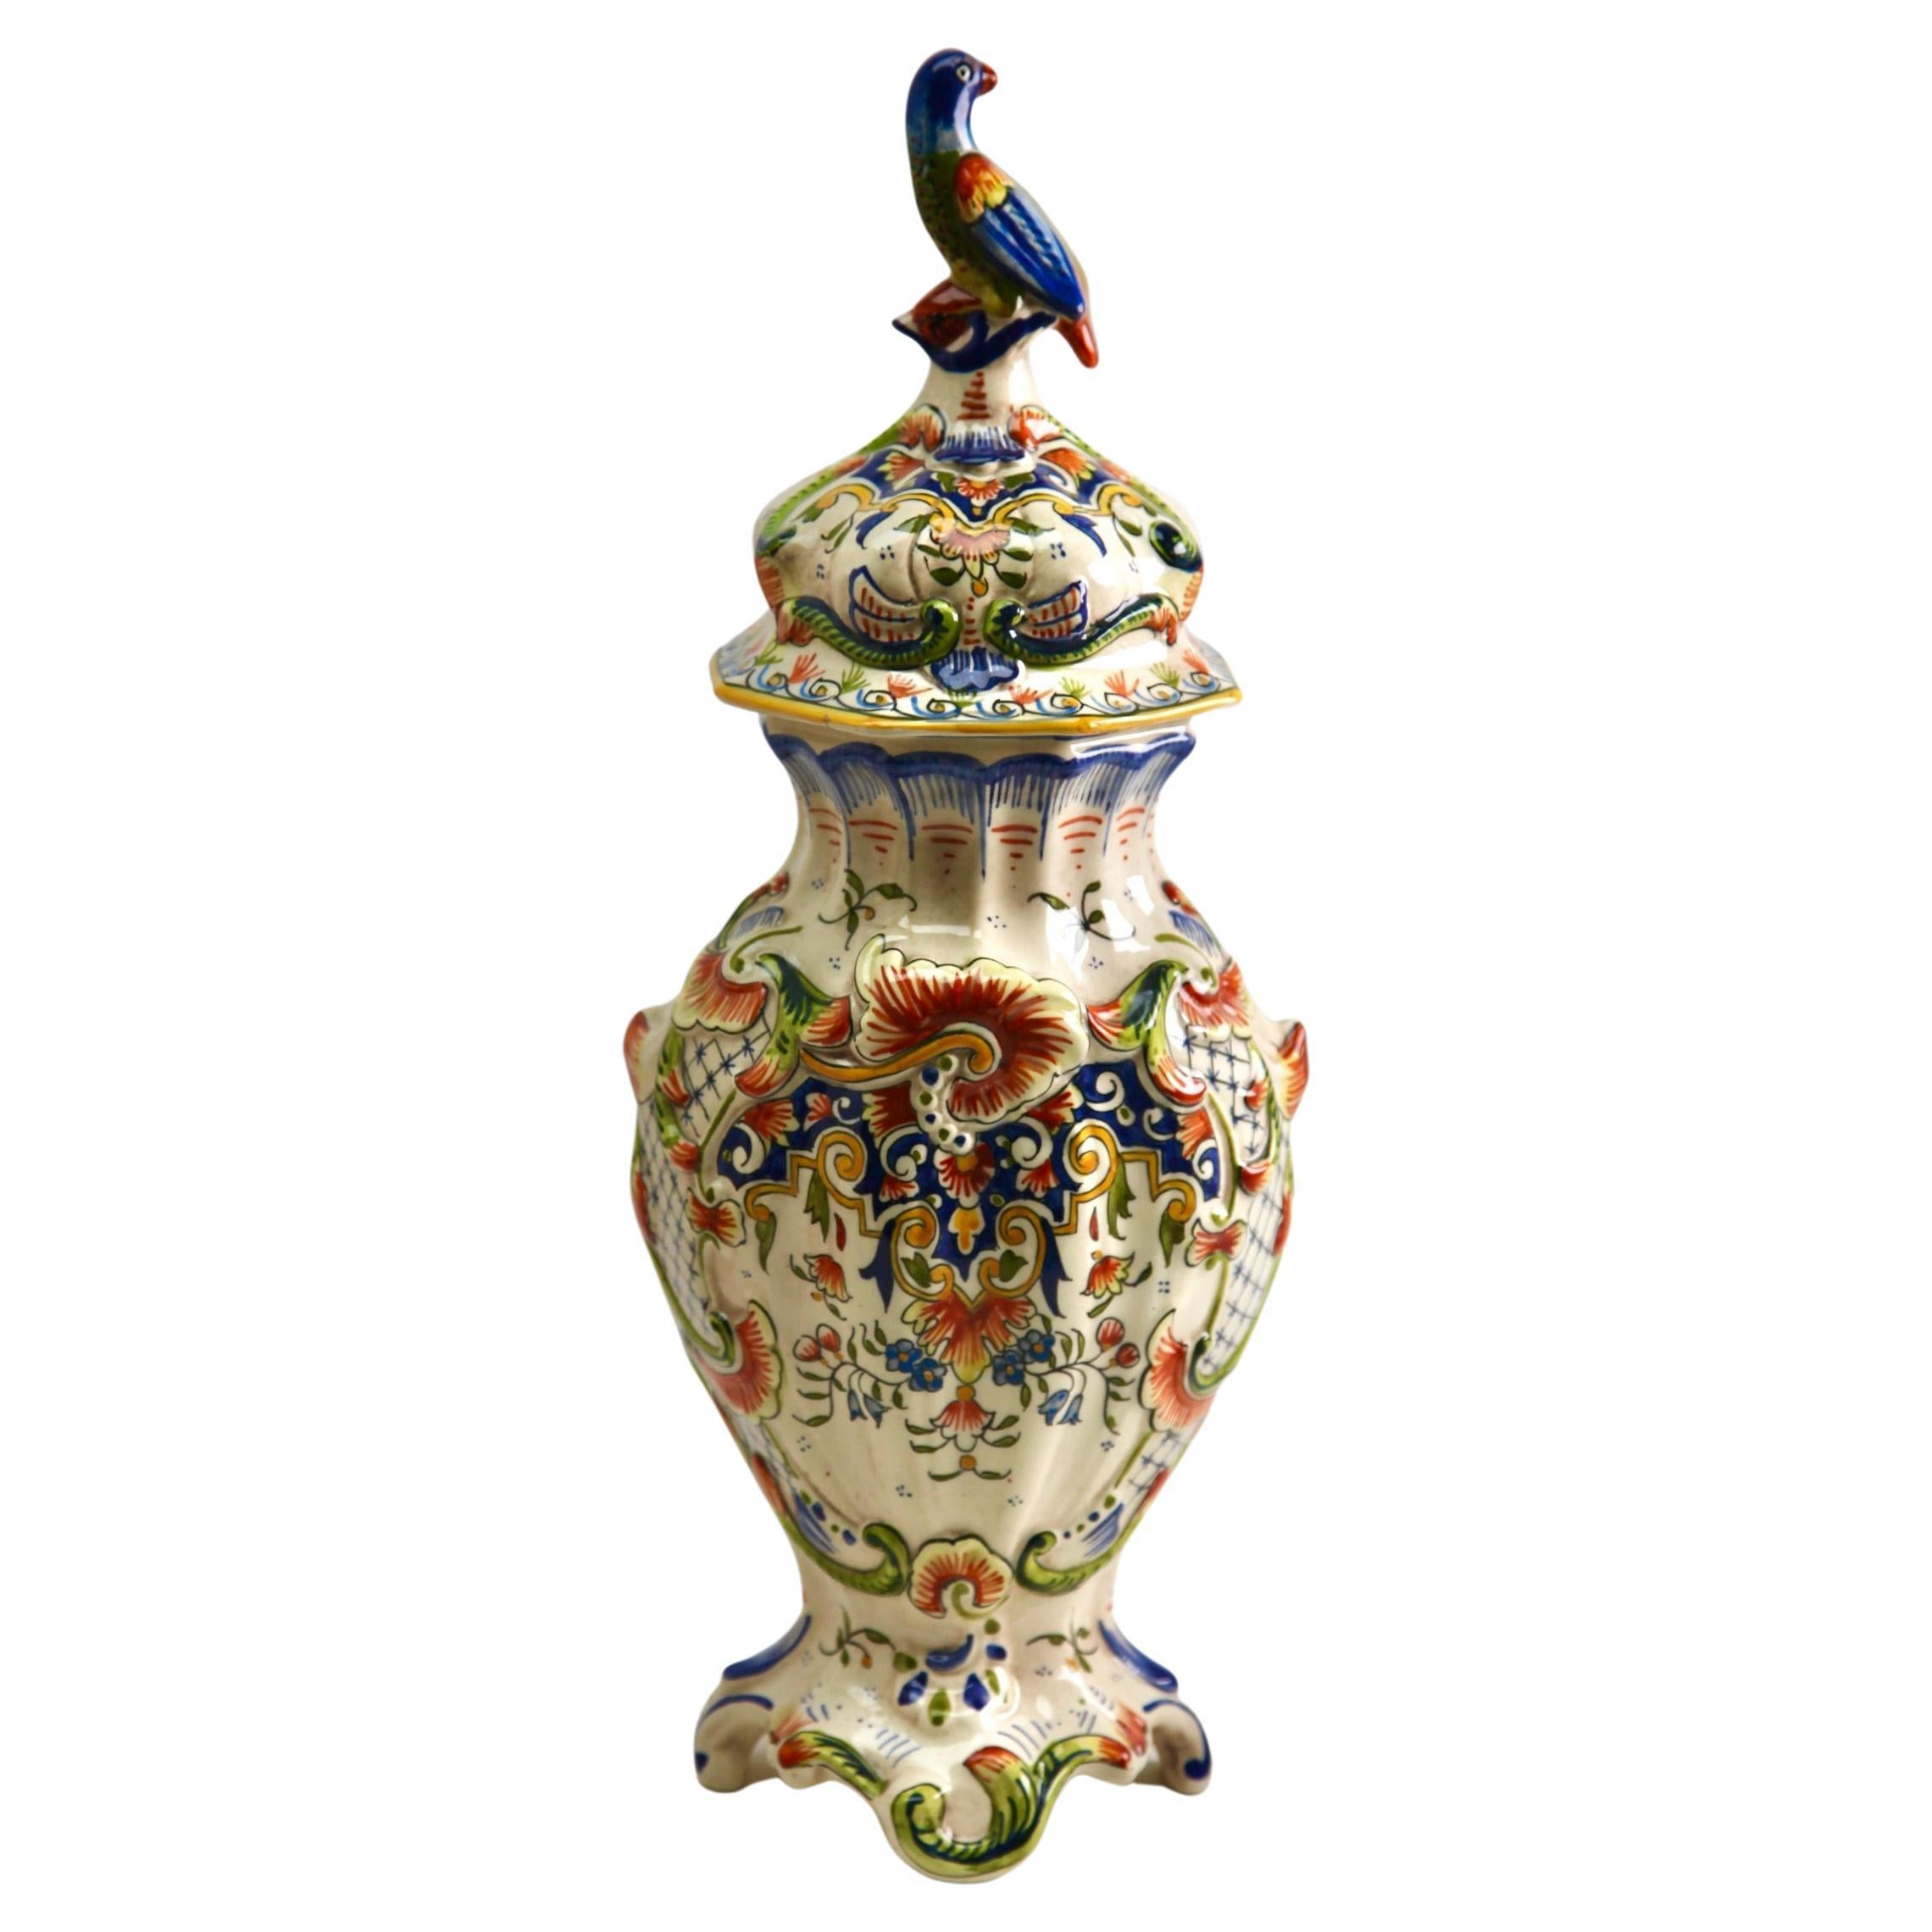 Early 20th Century French Hand-Painted Faience Large Vasse from Rouen For Sale